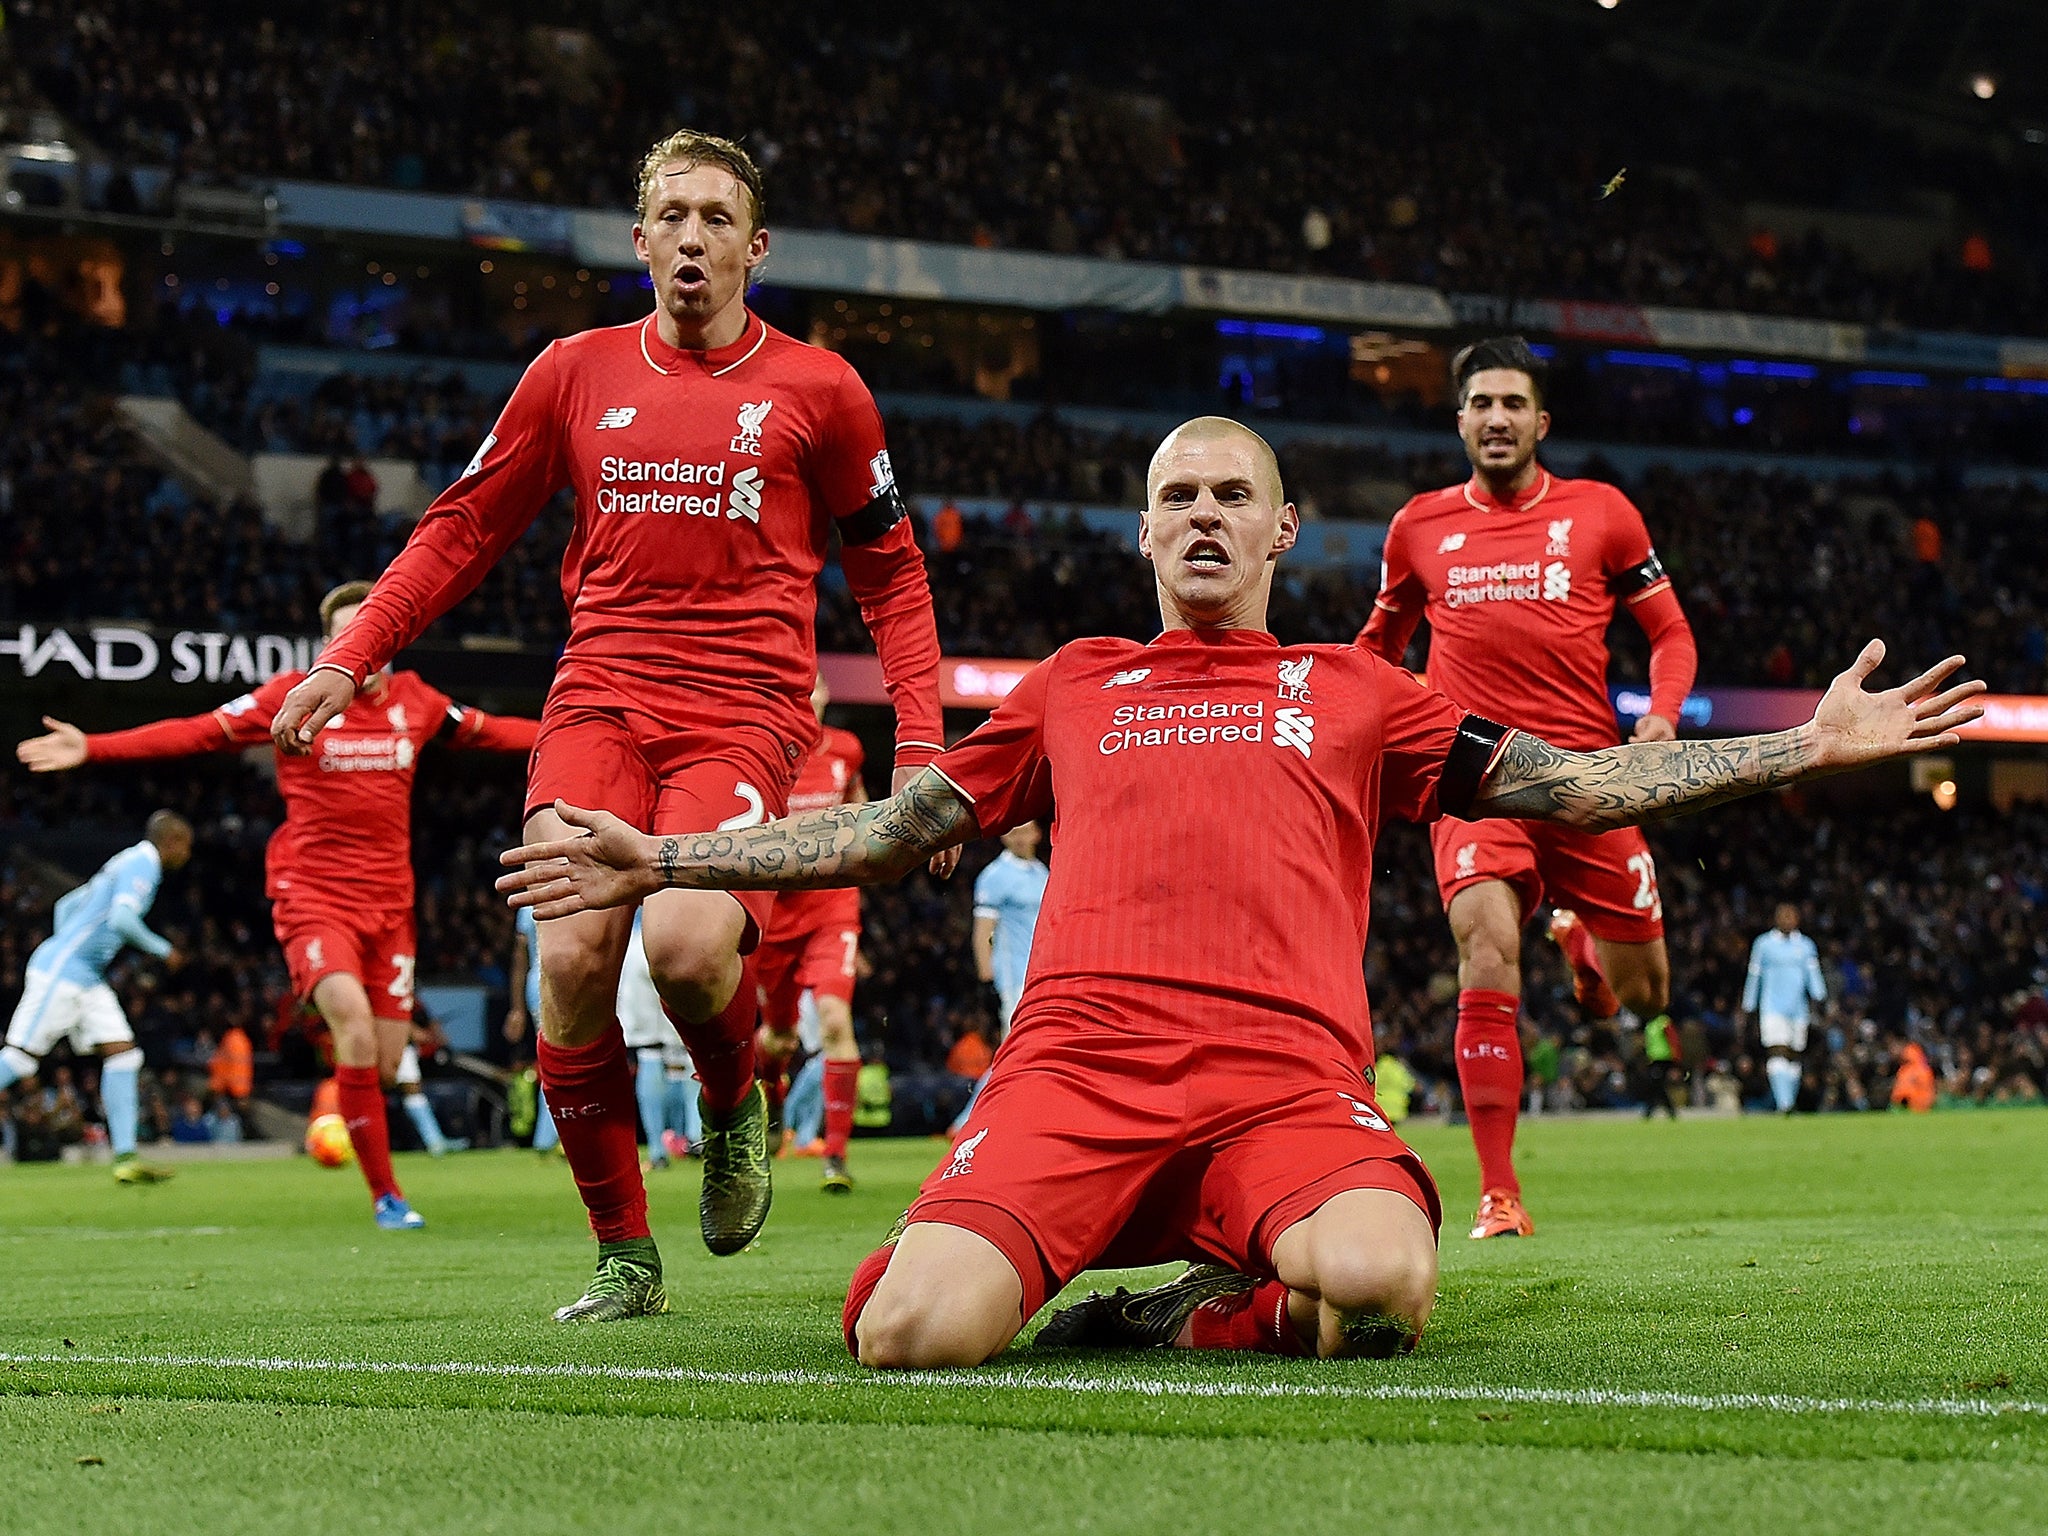 Martin Skrtel added Liverpool's fourth with a memorable strike